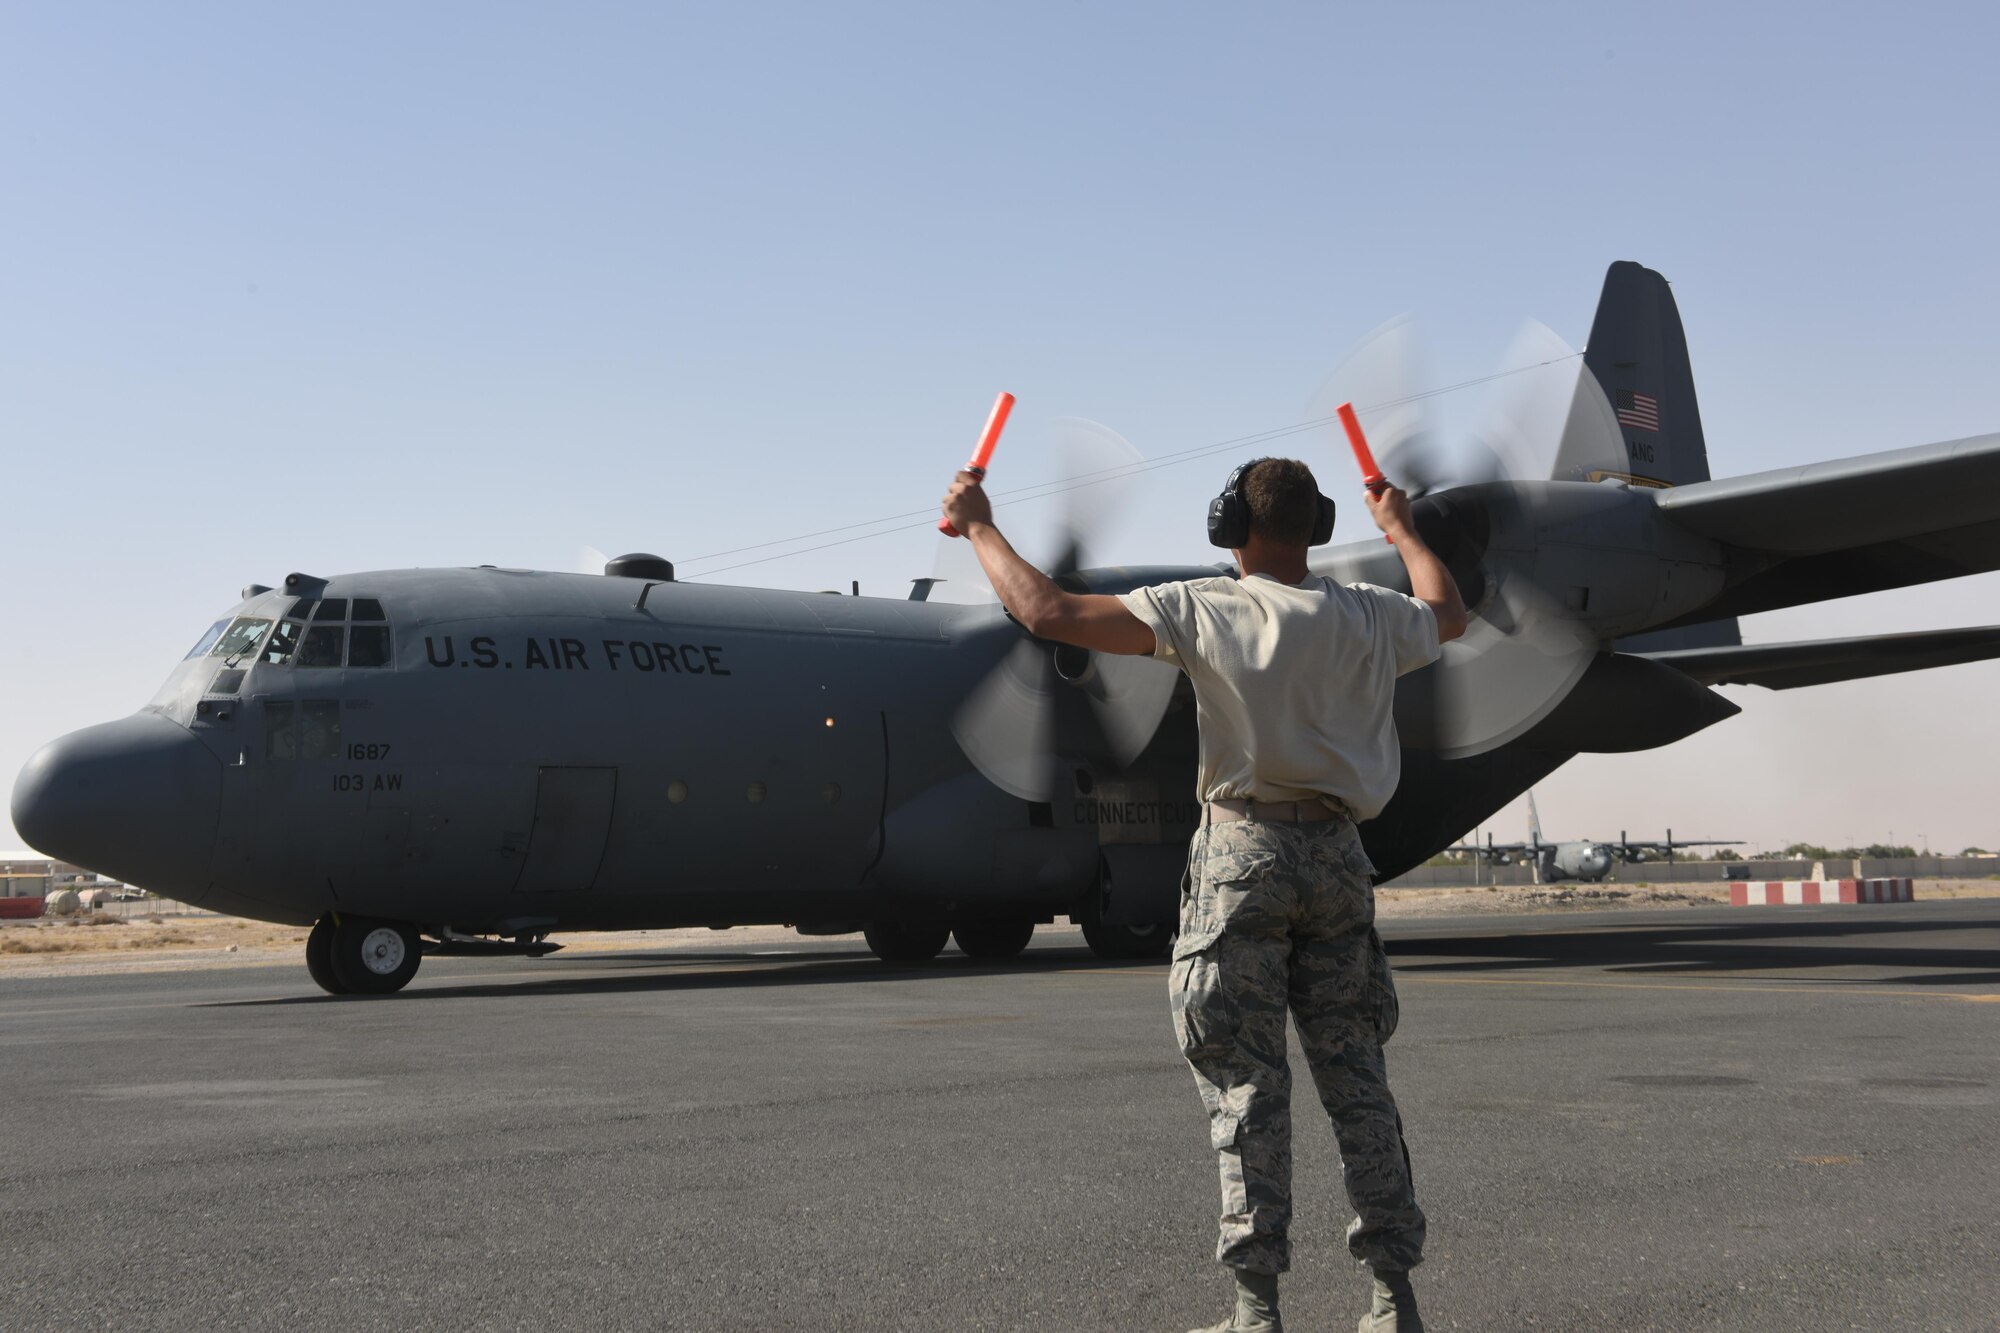 U.S. Air Force Academy Cadet Trey Griffin marshals a C-130 Hercules as it starts to taxi at an undisclosed location in Southwest Asia, June 27, 2017. The U.S. Air Force Academy cadets are deployed to the 386th Air Expeditionary Wing as part of the academy’s Operation Air Force program, which exposes cadets to a variety of career fields to aid them in their future career selections. (U.S. Air Force photo by Tech. Sgt. Jonathan Hehnly)